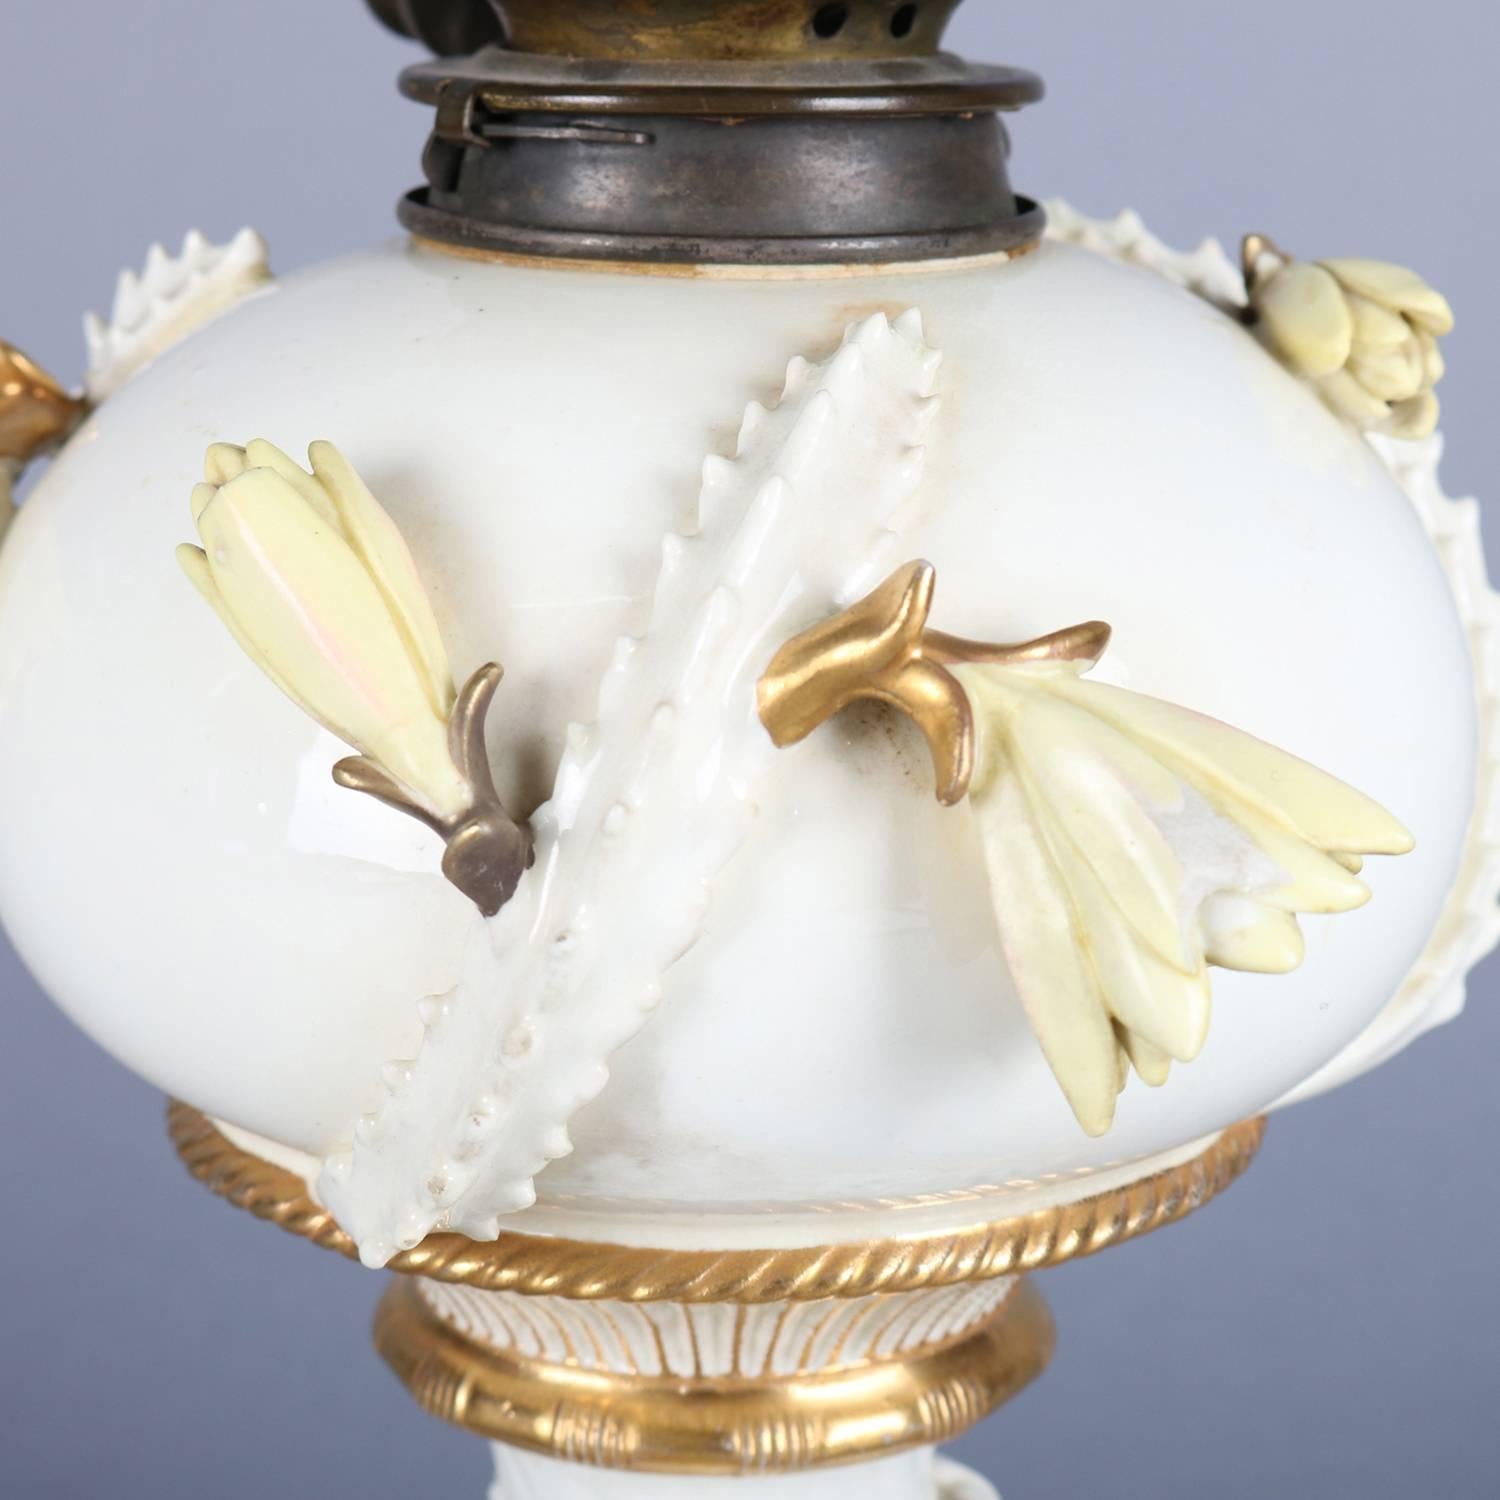 Etched Antique English Hand-Painted and Gilt Porcelain Floral GWW Lamp by Moore's